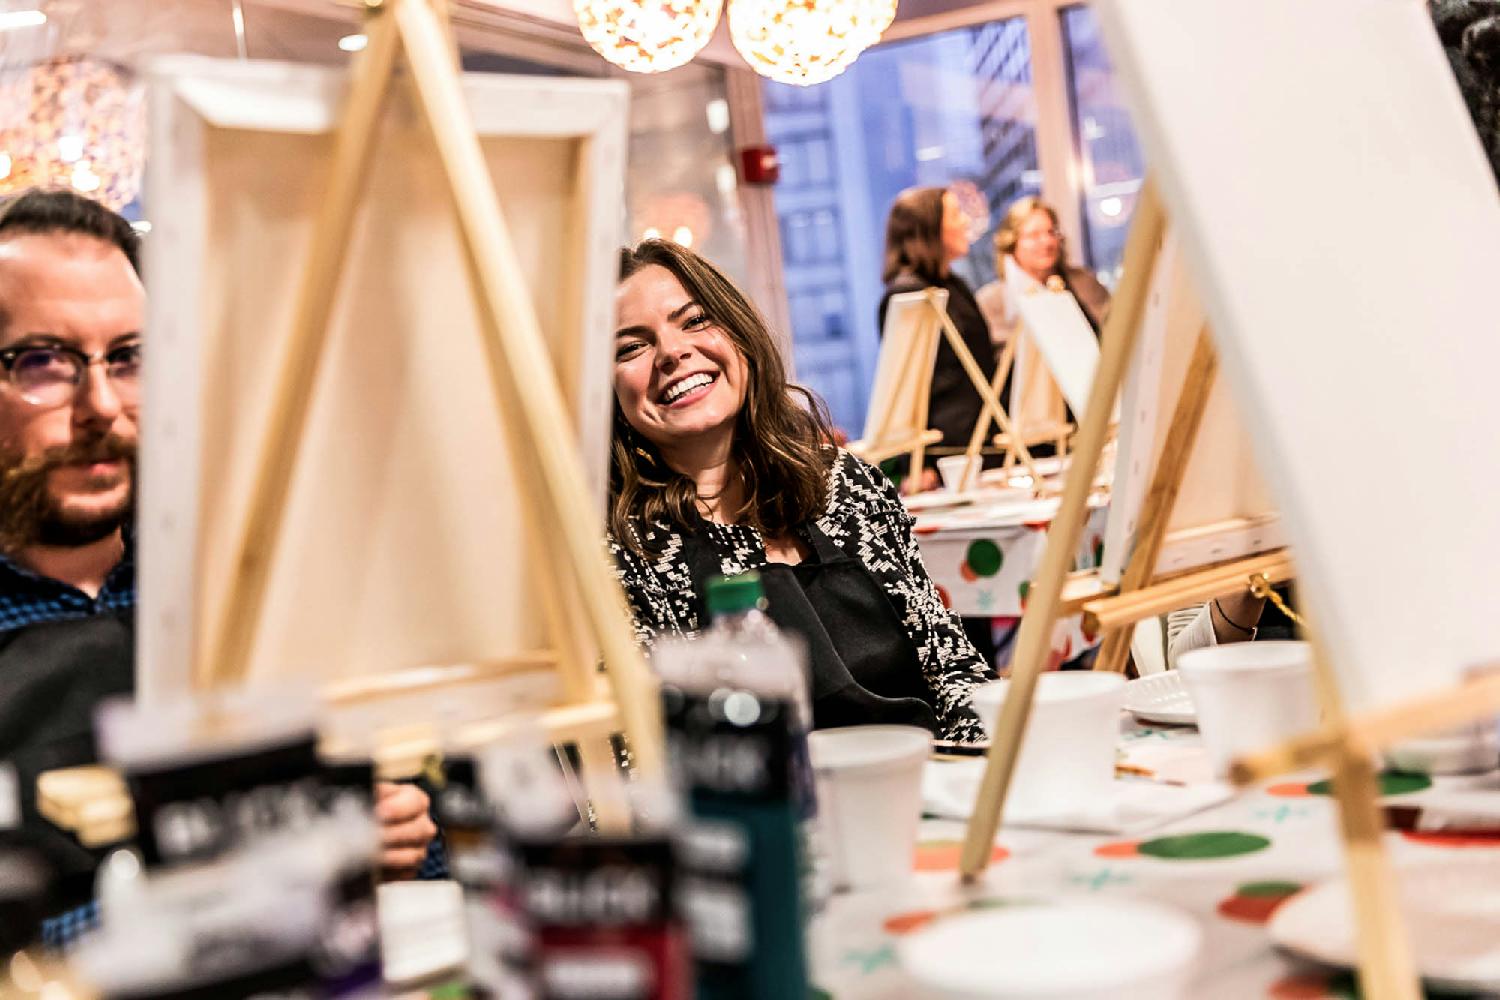 Employees get creative at annual paint and sip events celebrating everything from Black History Month to the holidays.